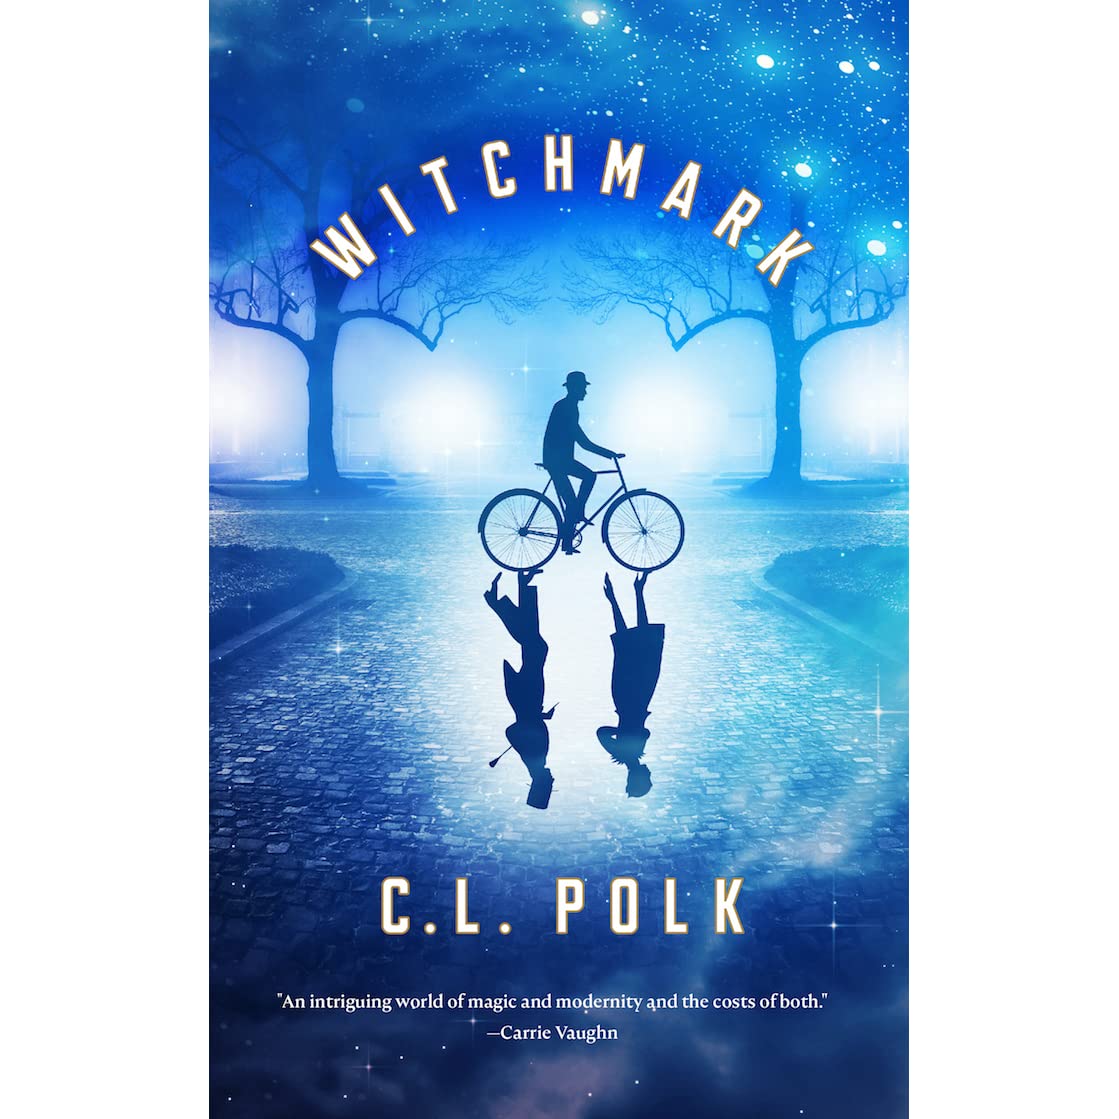 C.L. Polk: Witchmark (The Kingston Cycle, #1)